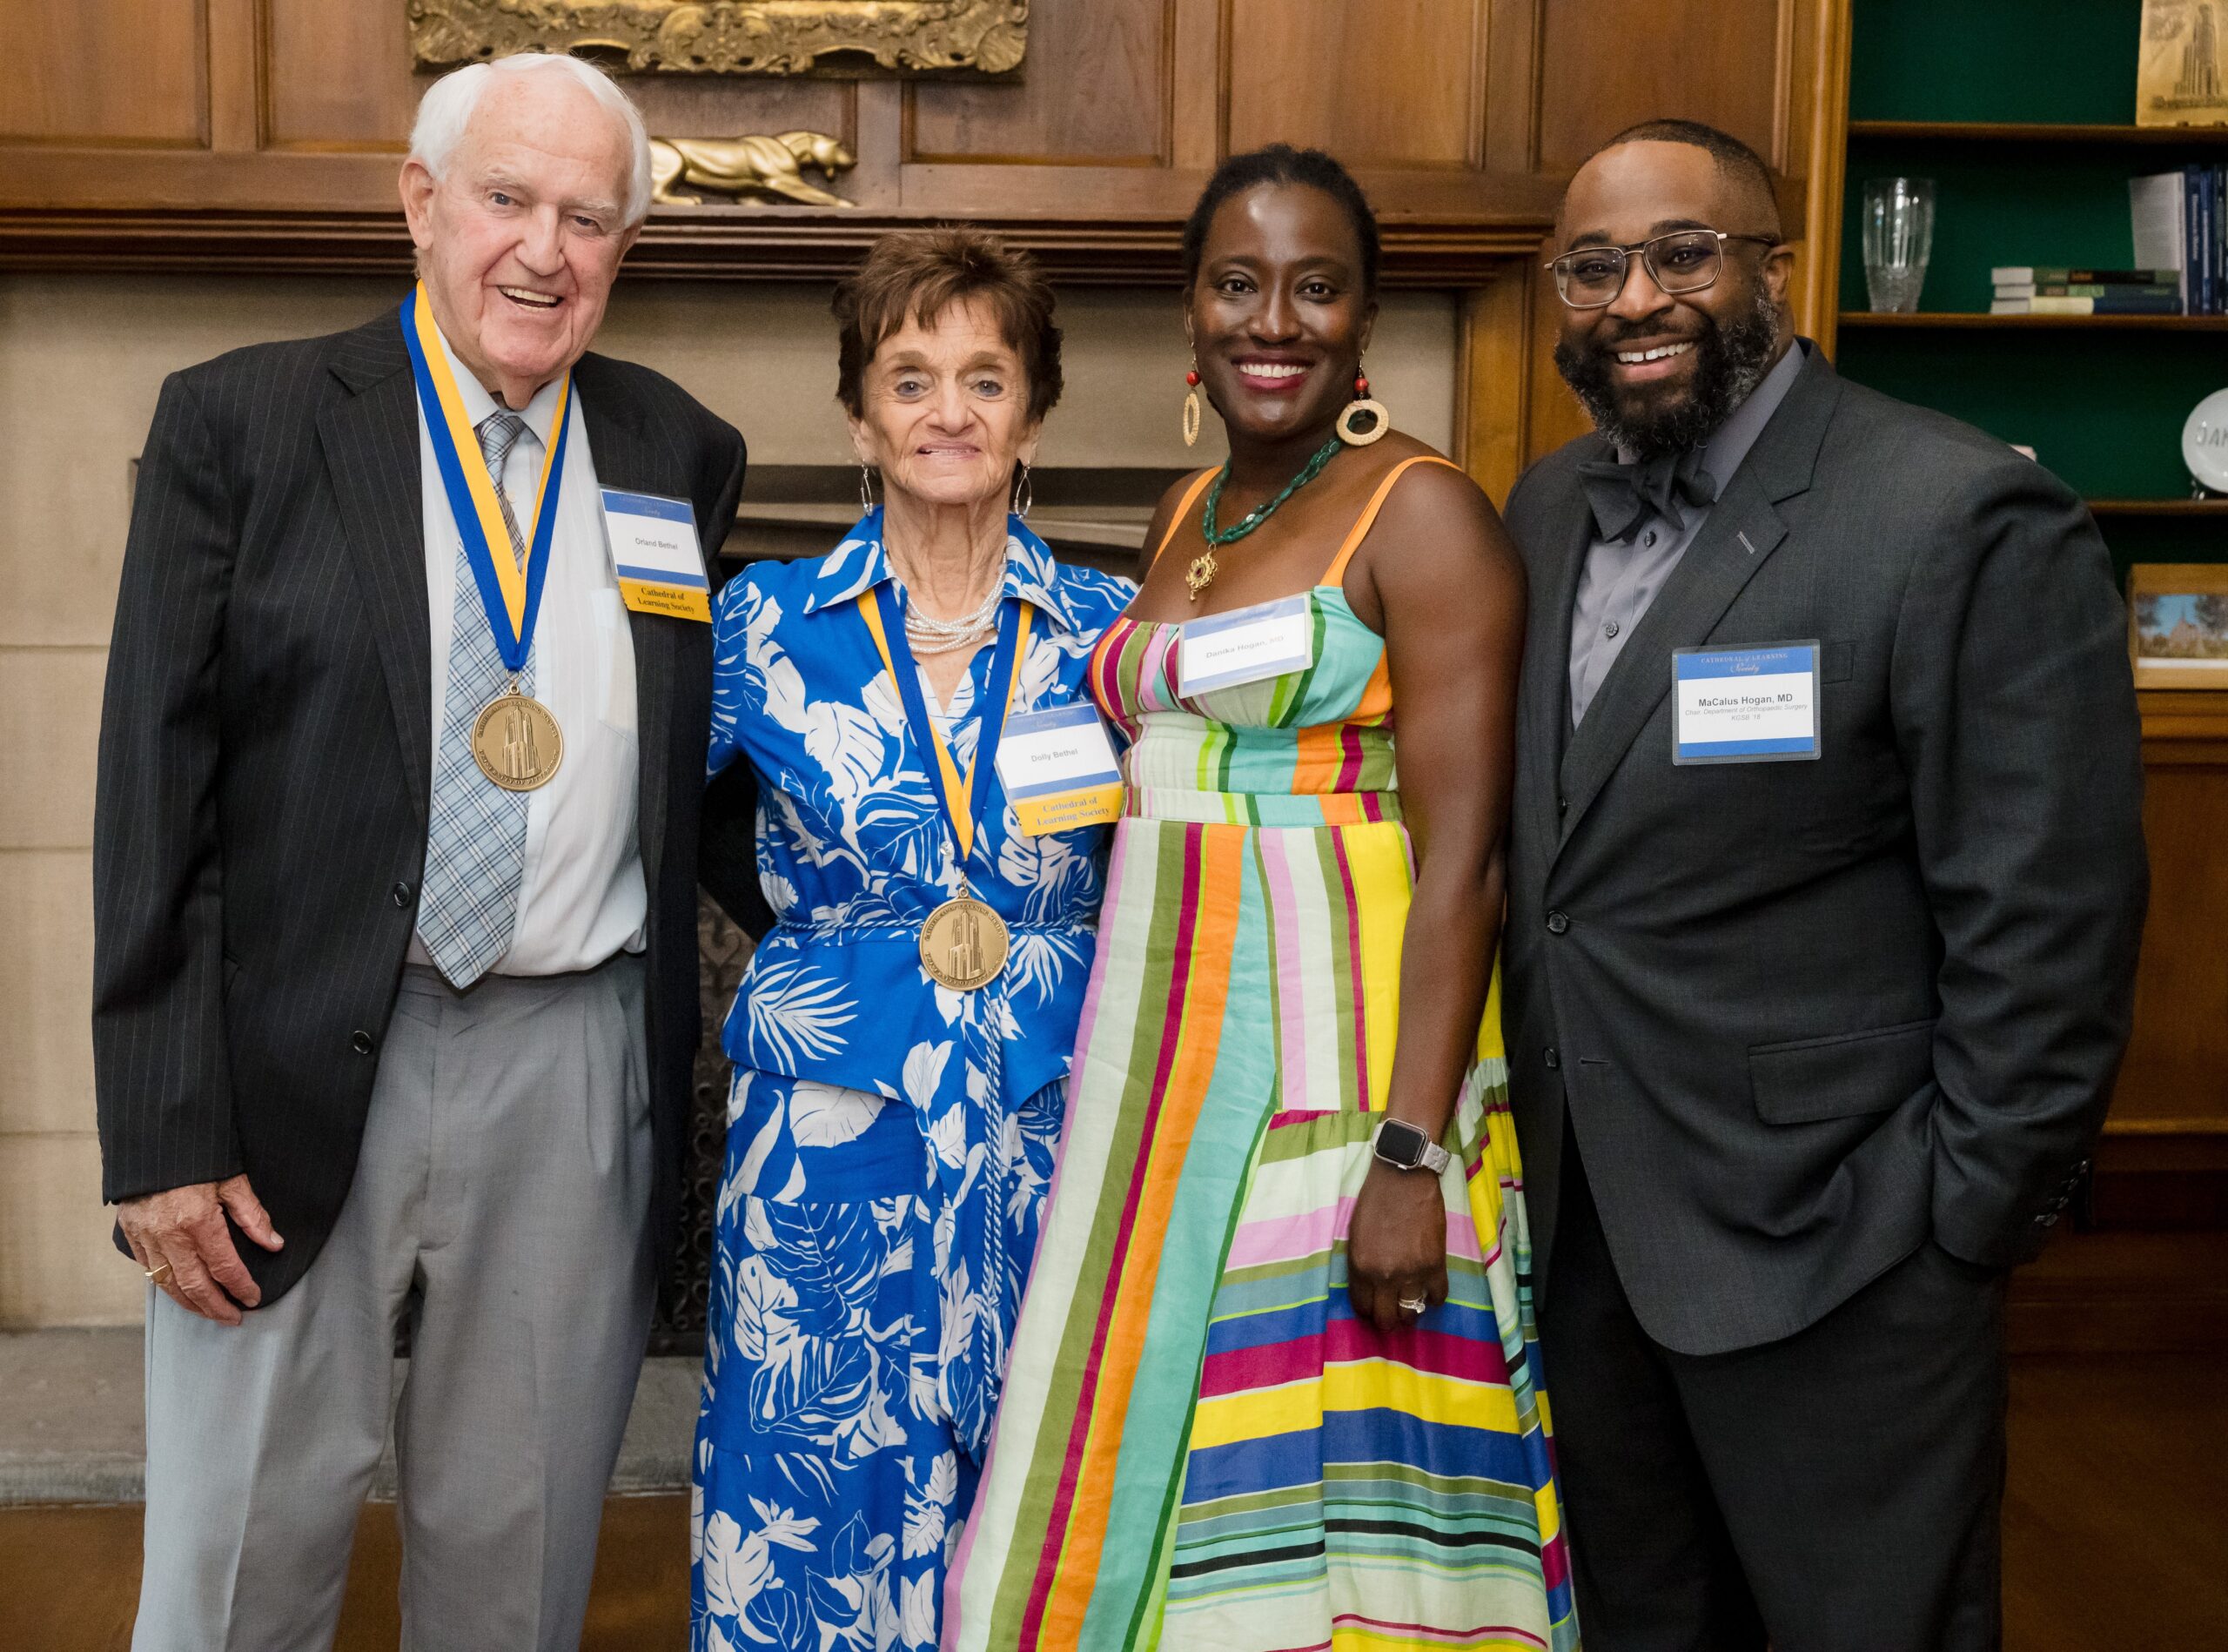 Orland Bethel Family Honored at Pitt Cathedral of Learning Society